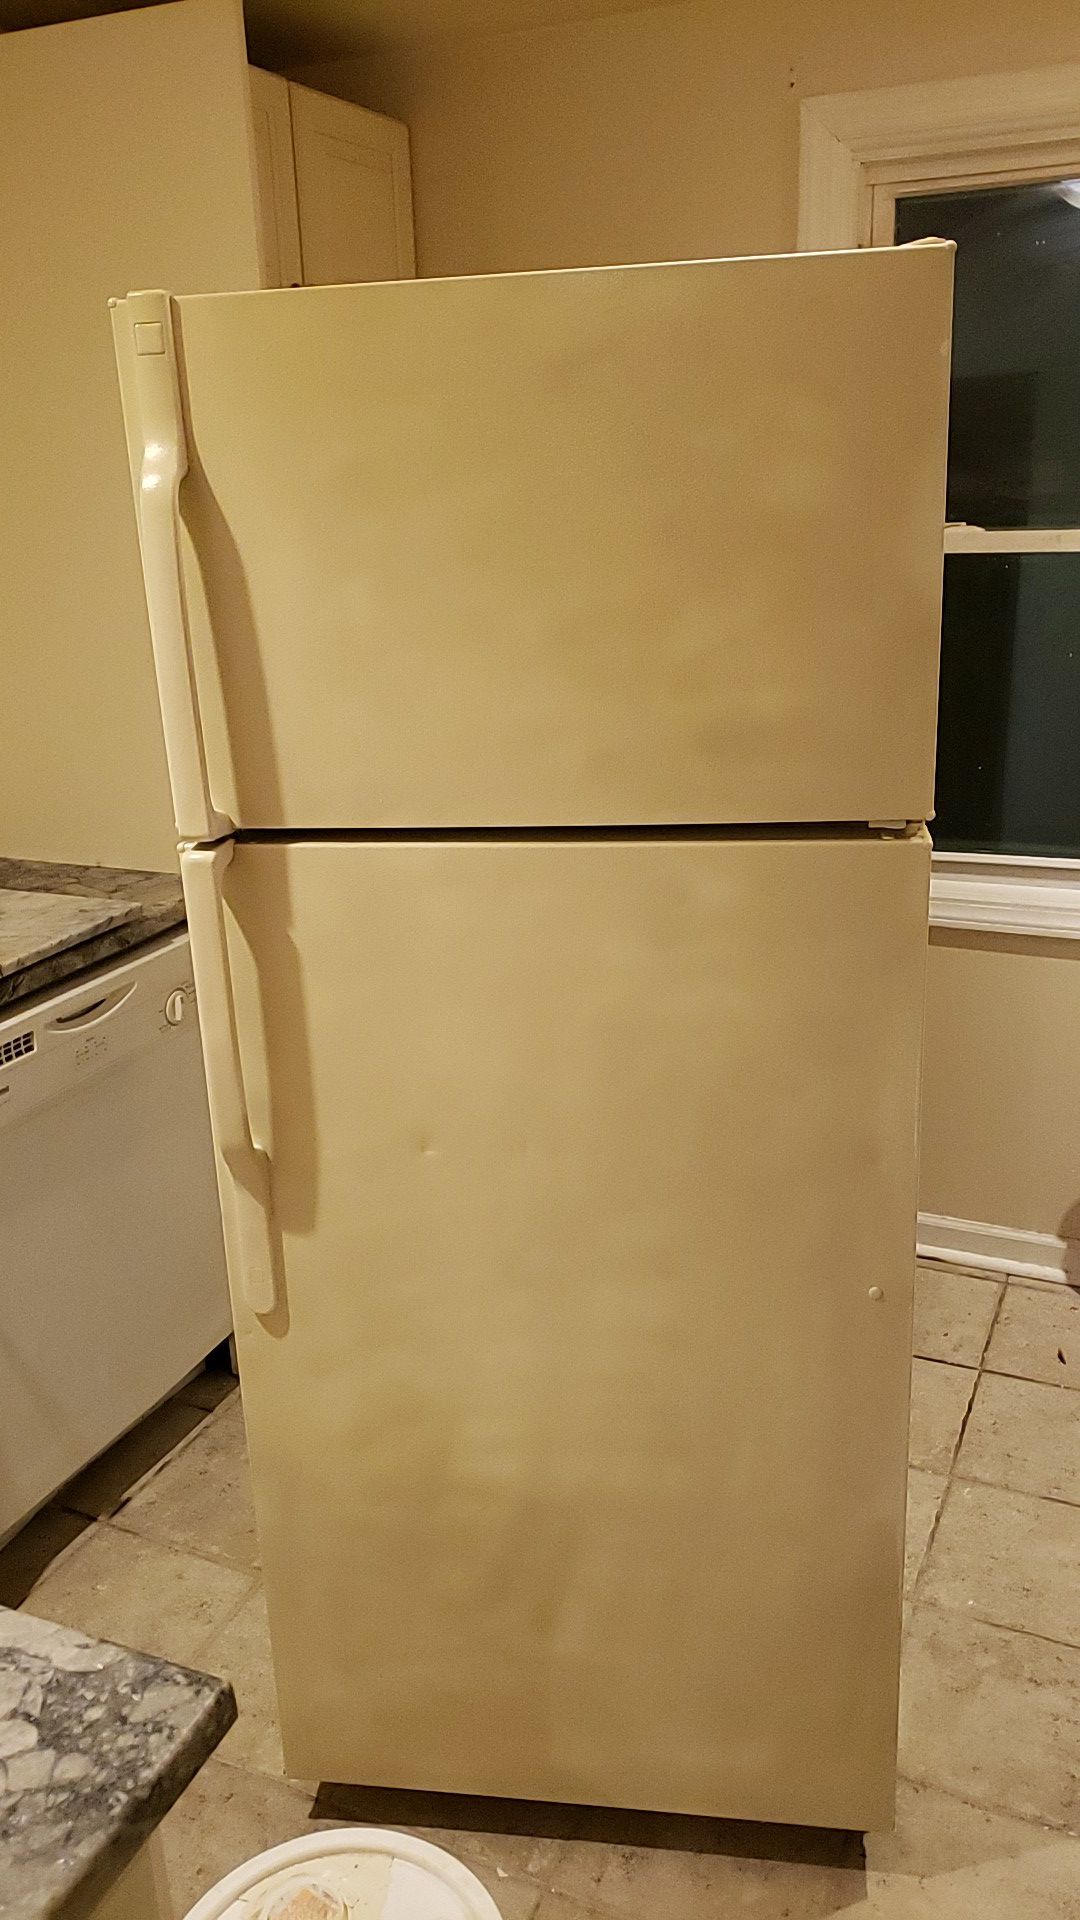 Refrigerator, gas stove and dishwasher